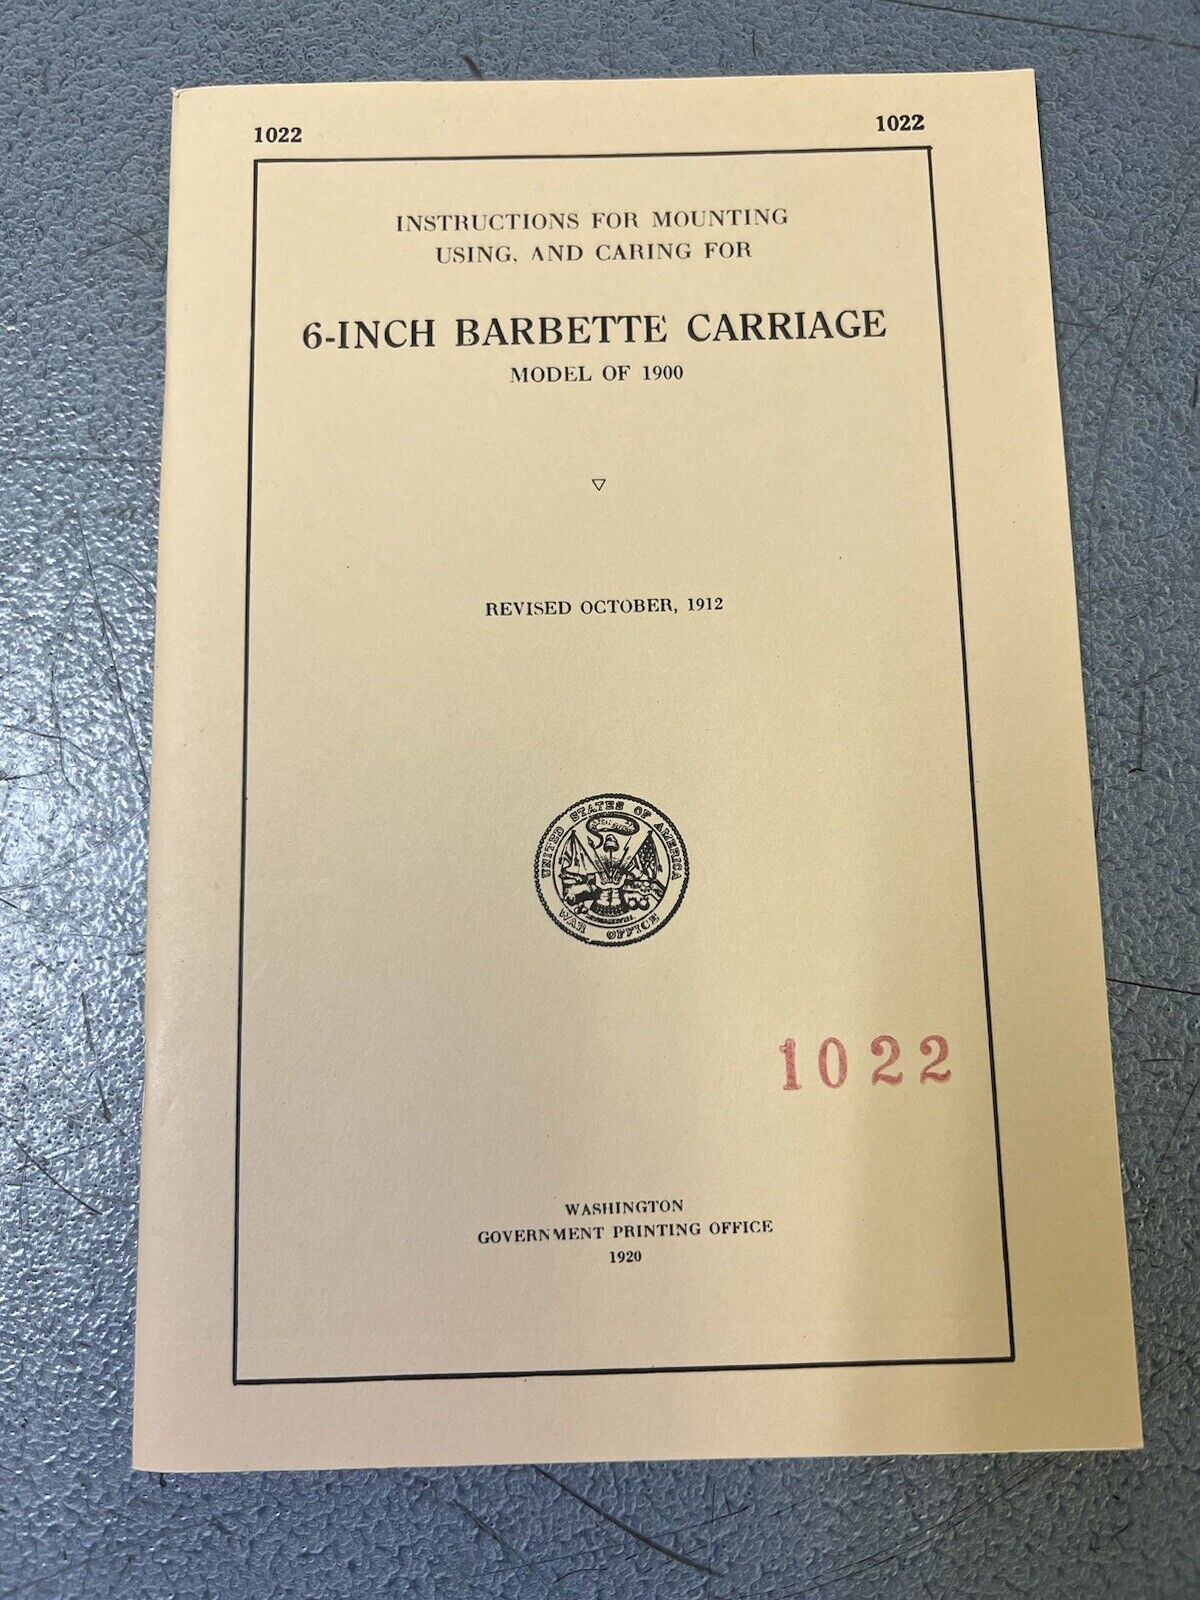 1920 Instruction Booklet for 5-inch Barbette Carriages Model 1900 Reprint